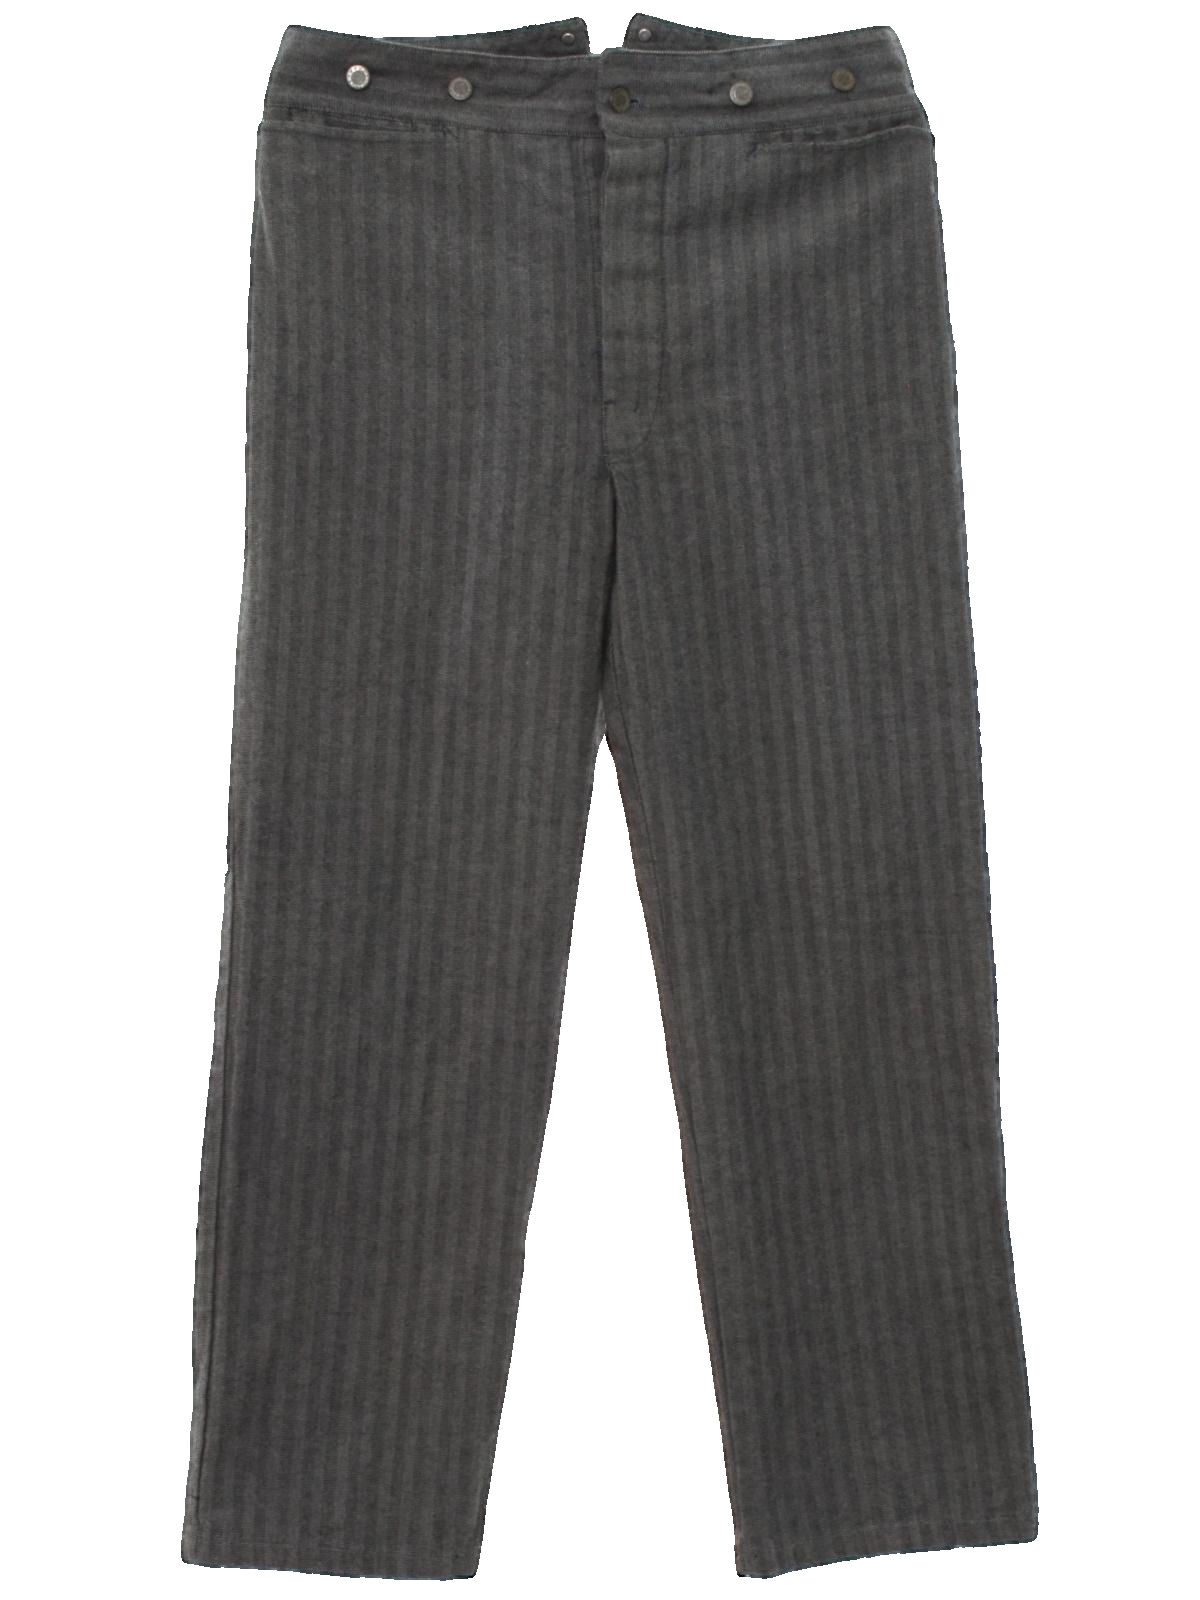 1920's Retro Pants: Pre-1920s style (made recently) -Wah- Mens heather ...